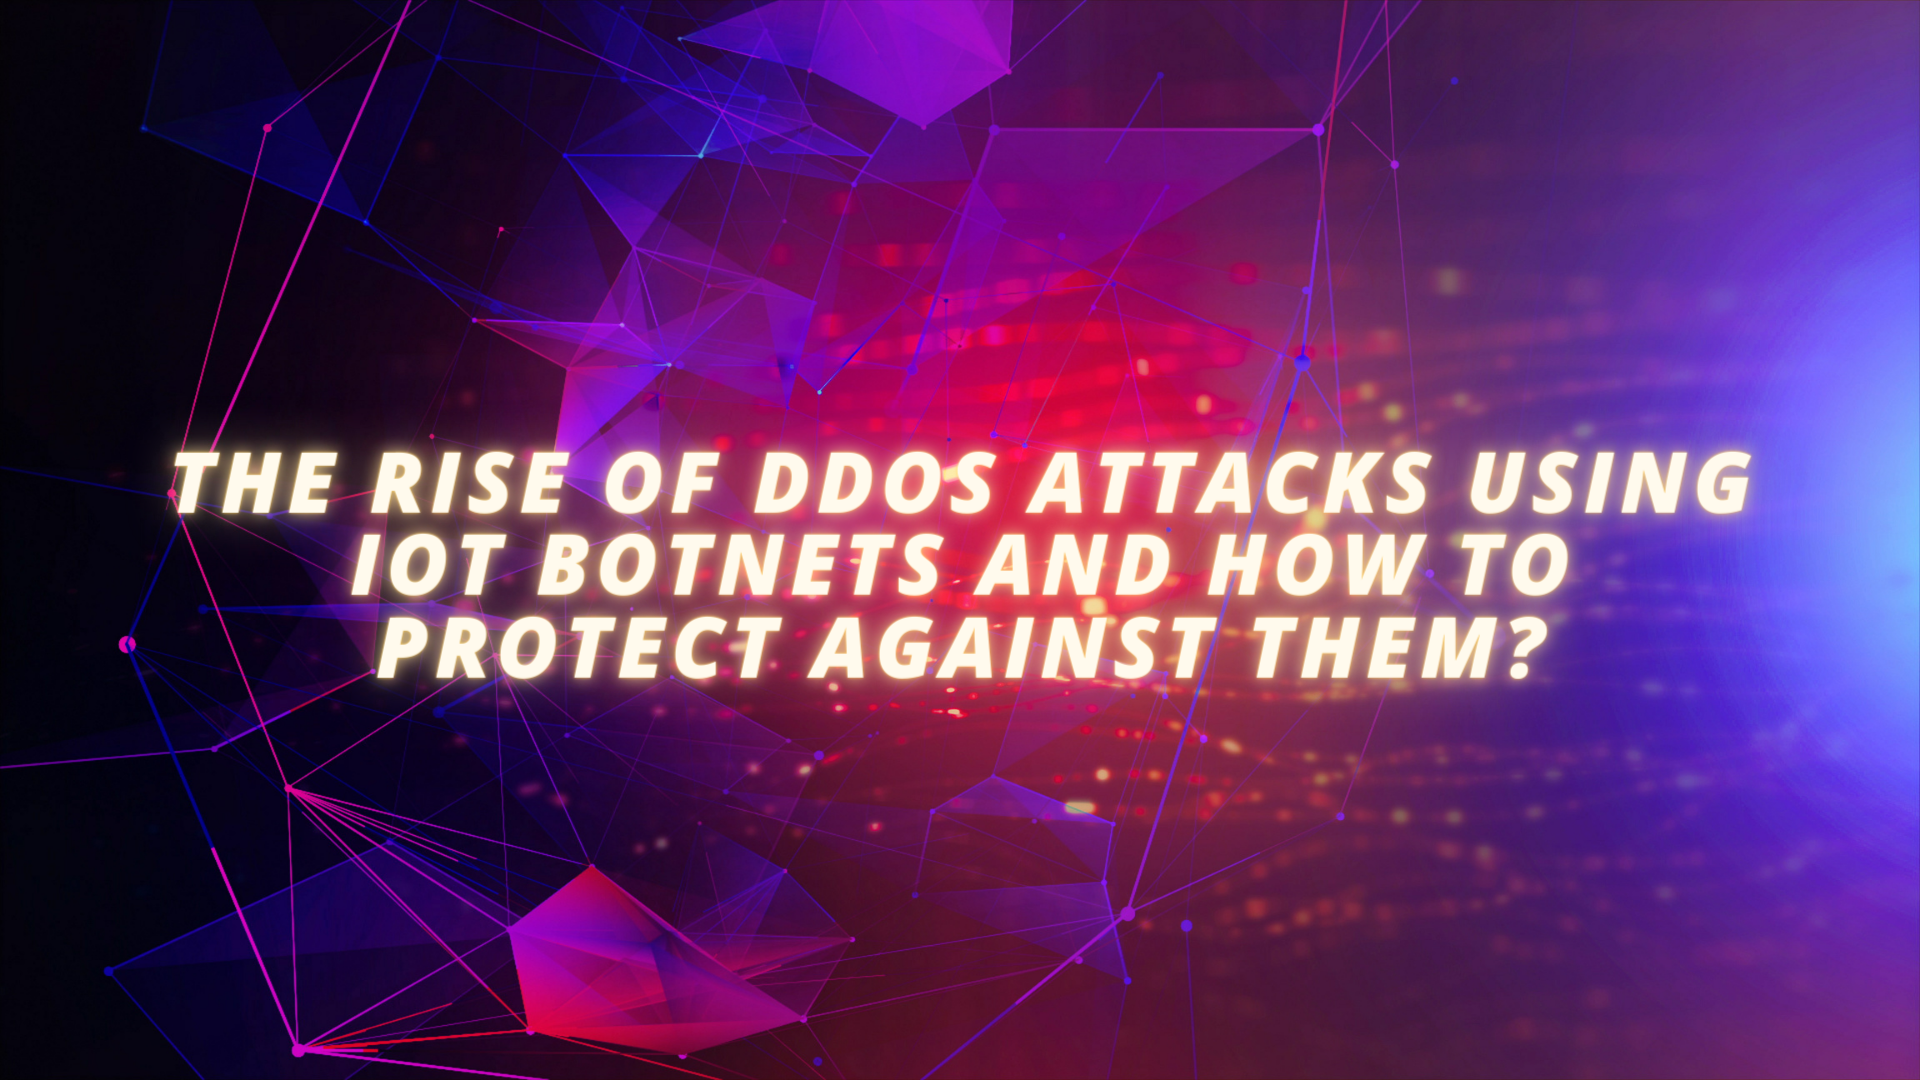 The rise of DDoS attacks using IoT botnets and how to protect against them